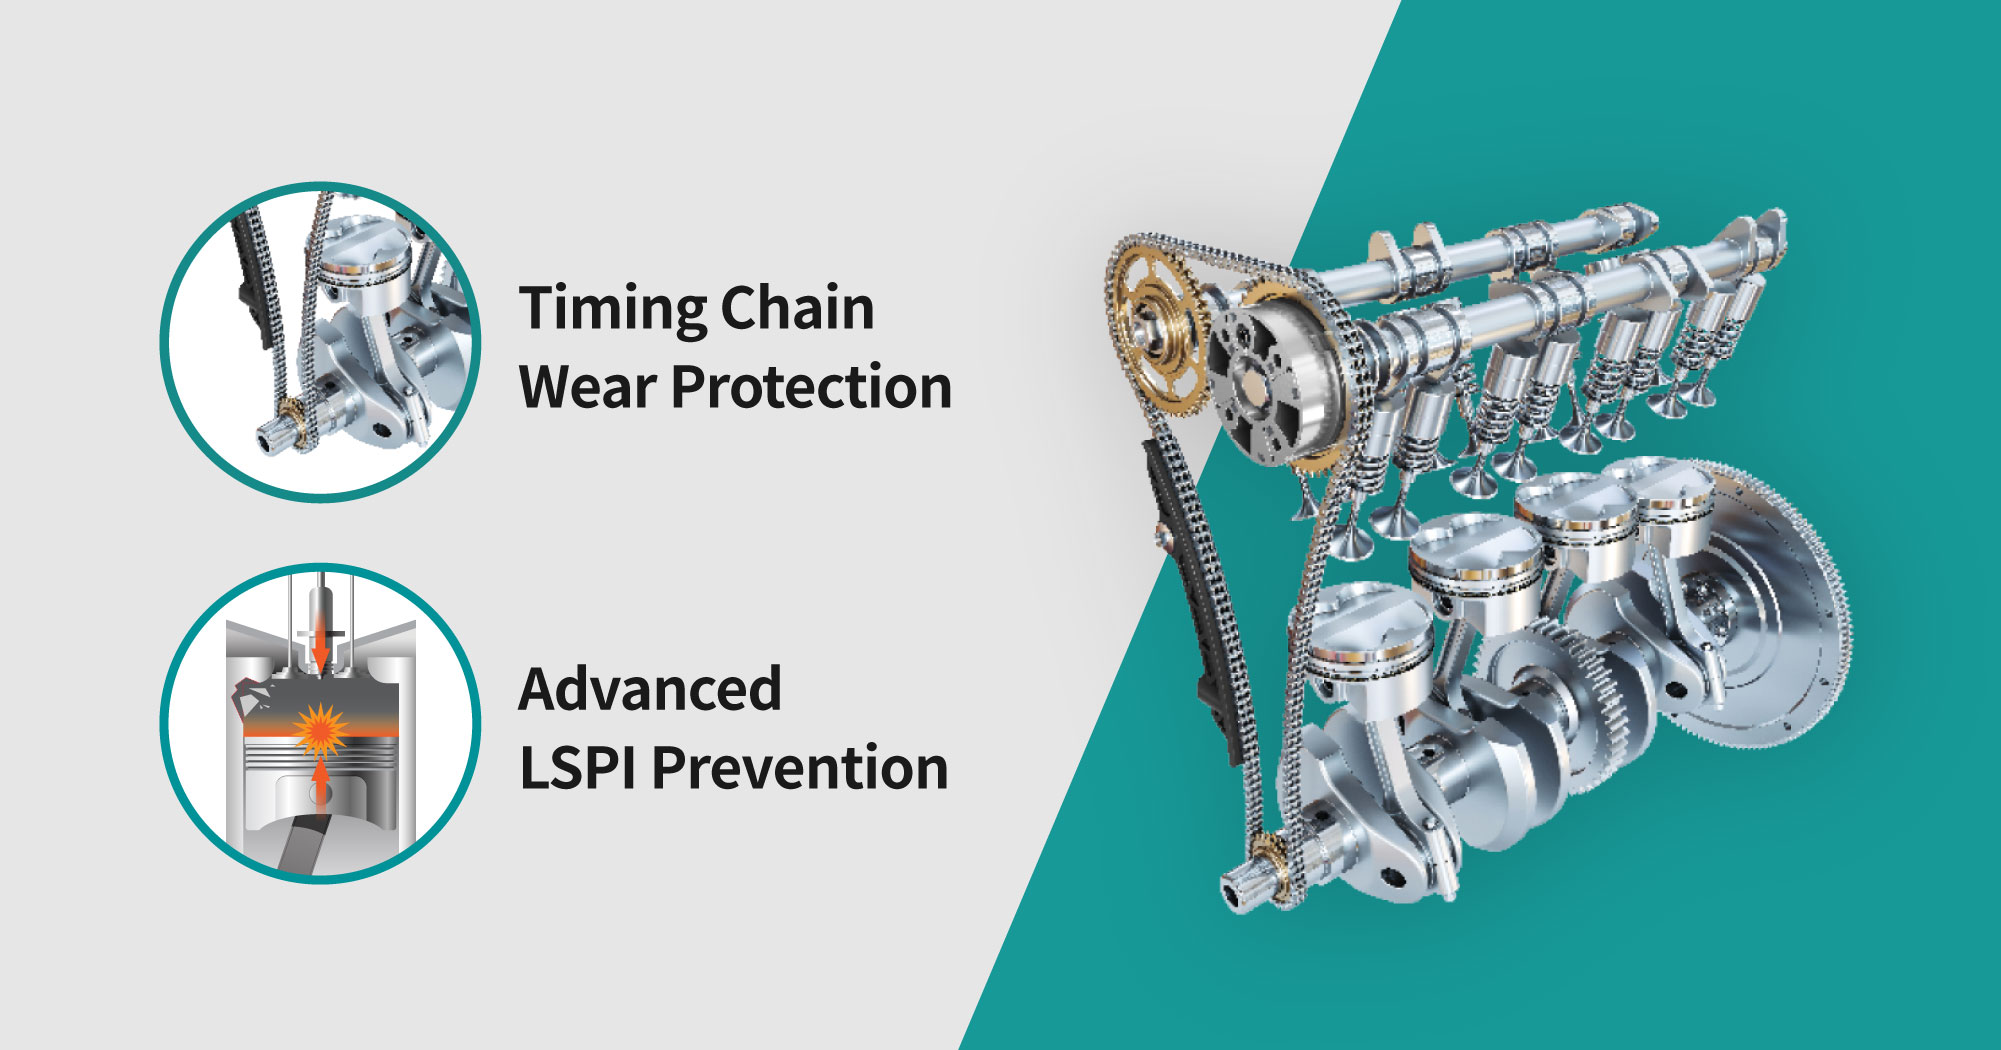 Timing chain wear protection and advanced LSPI prevention, two of the main criteria for API SP